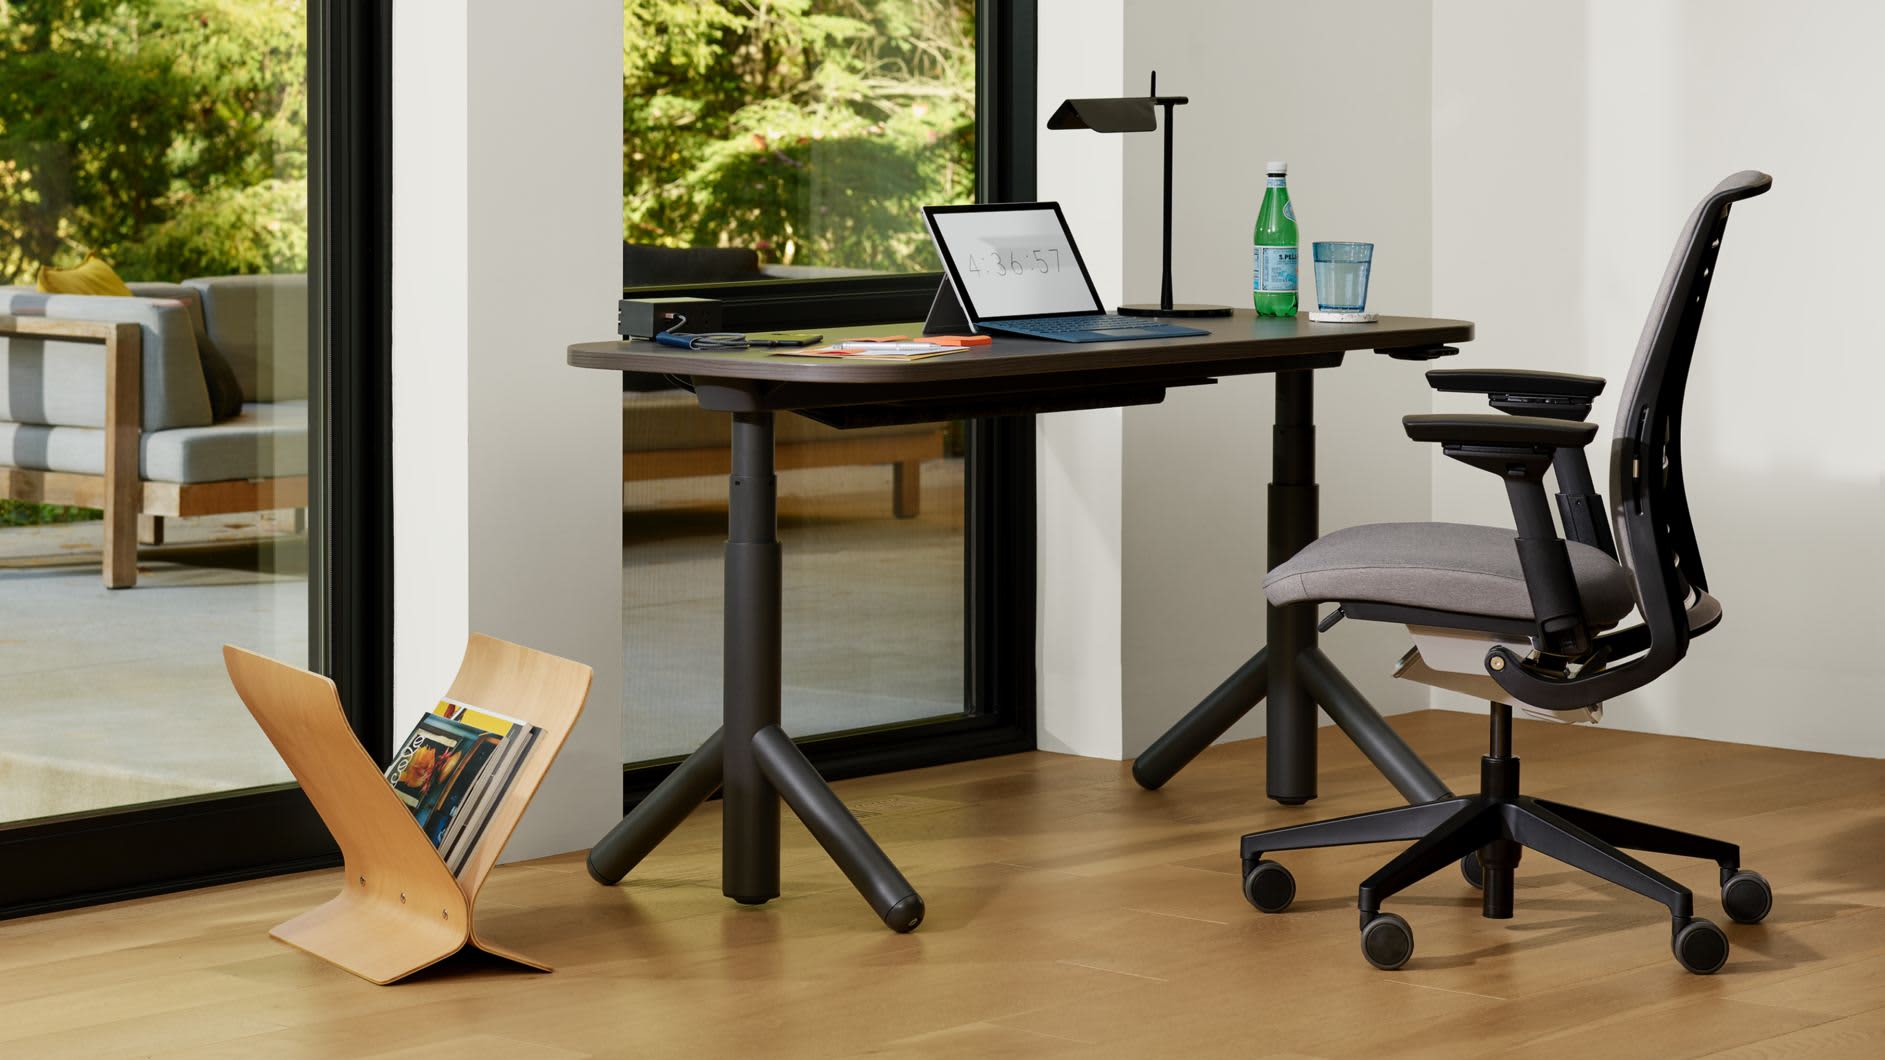 Details about   Actiforce VL2 Series Sit to Stand Replacement Motors Steelcase Adjustable Table 